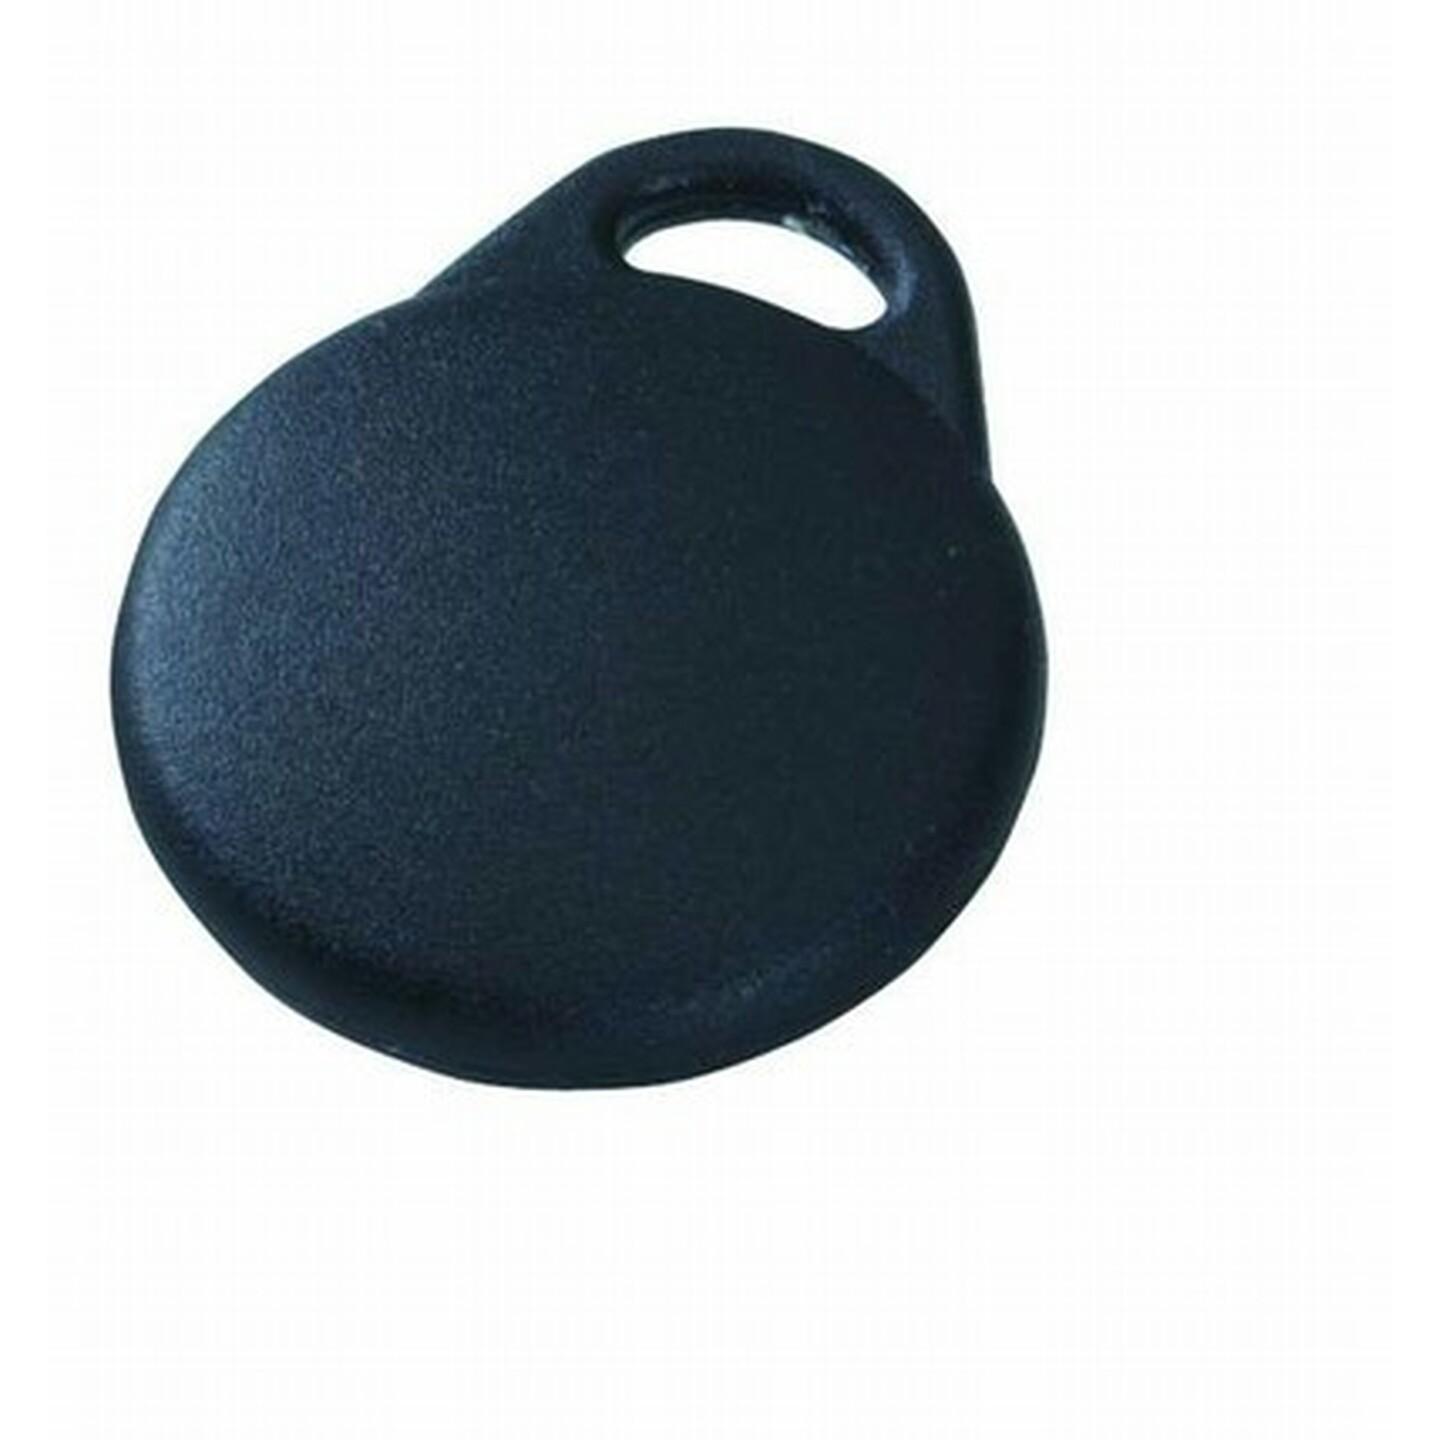 RFID Access Control Key Fob to Suit Module AA-0210